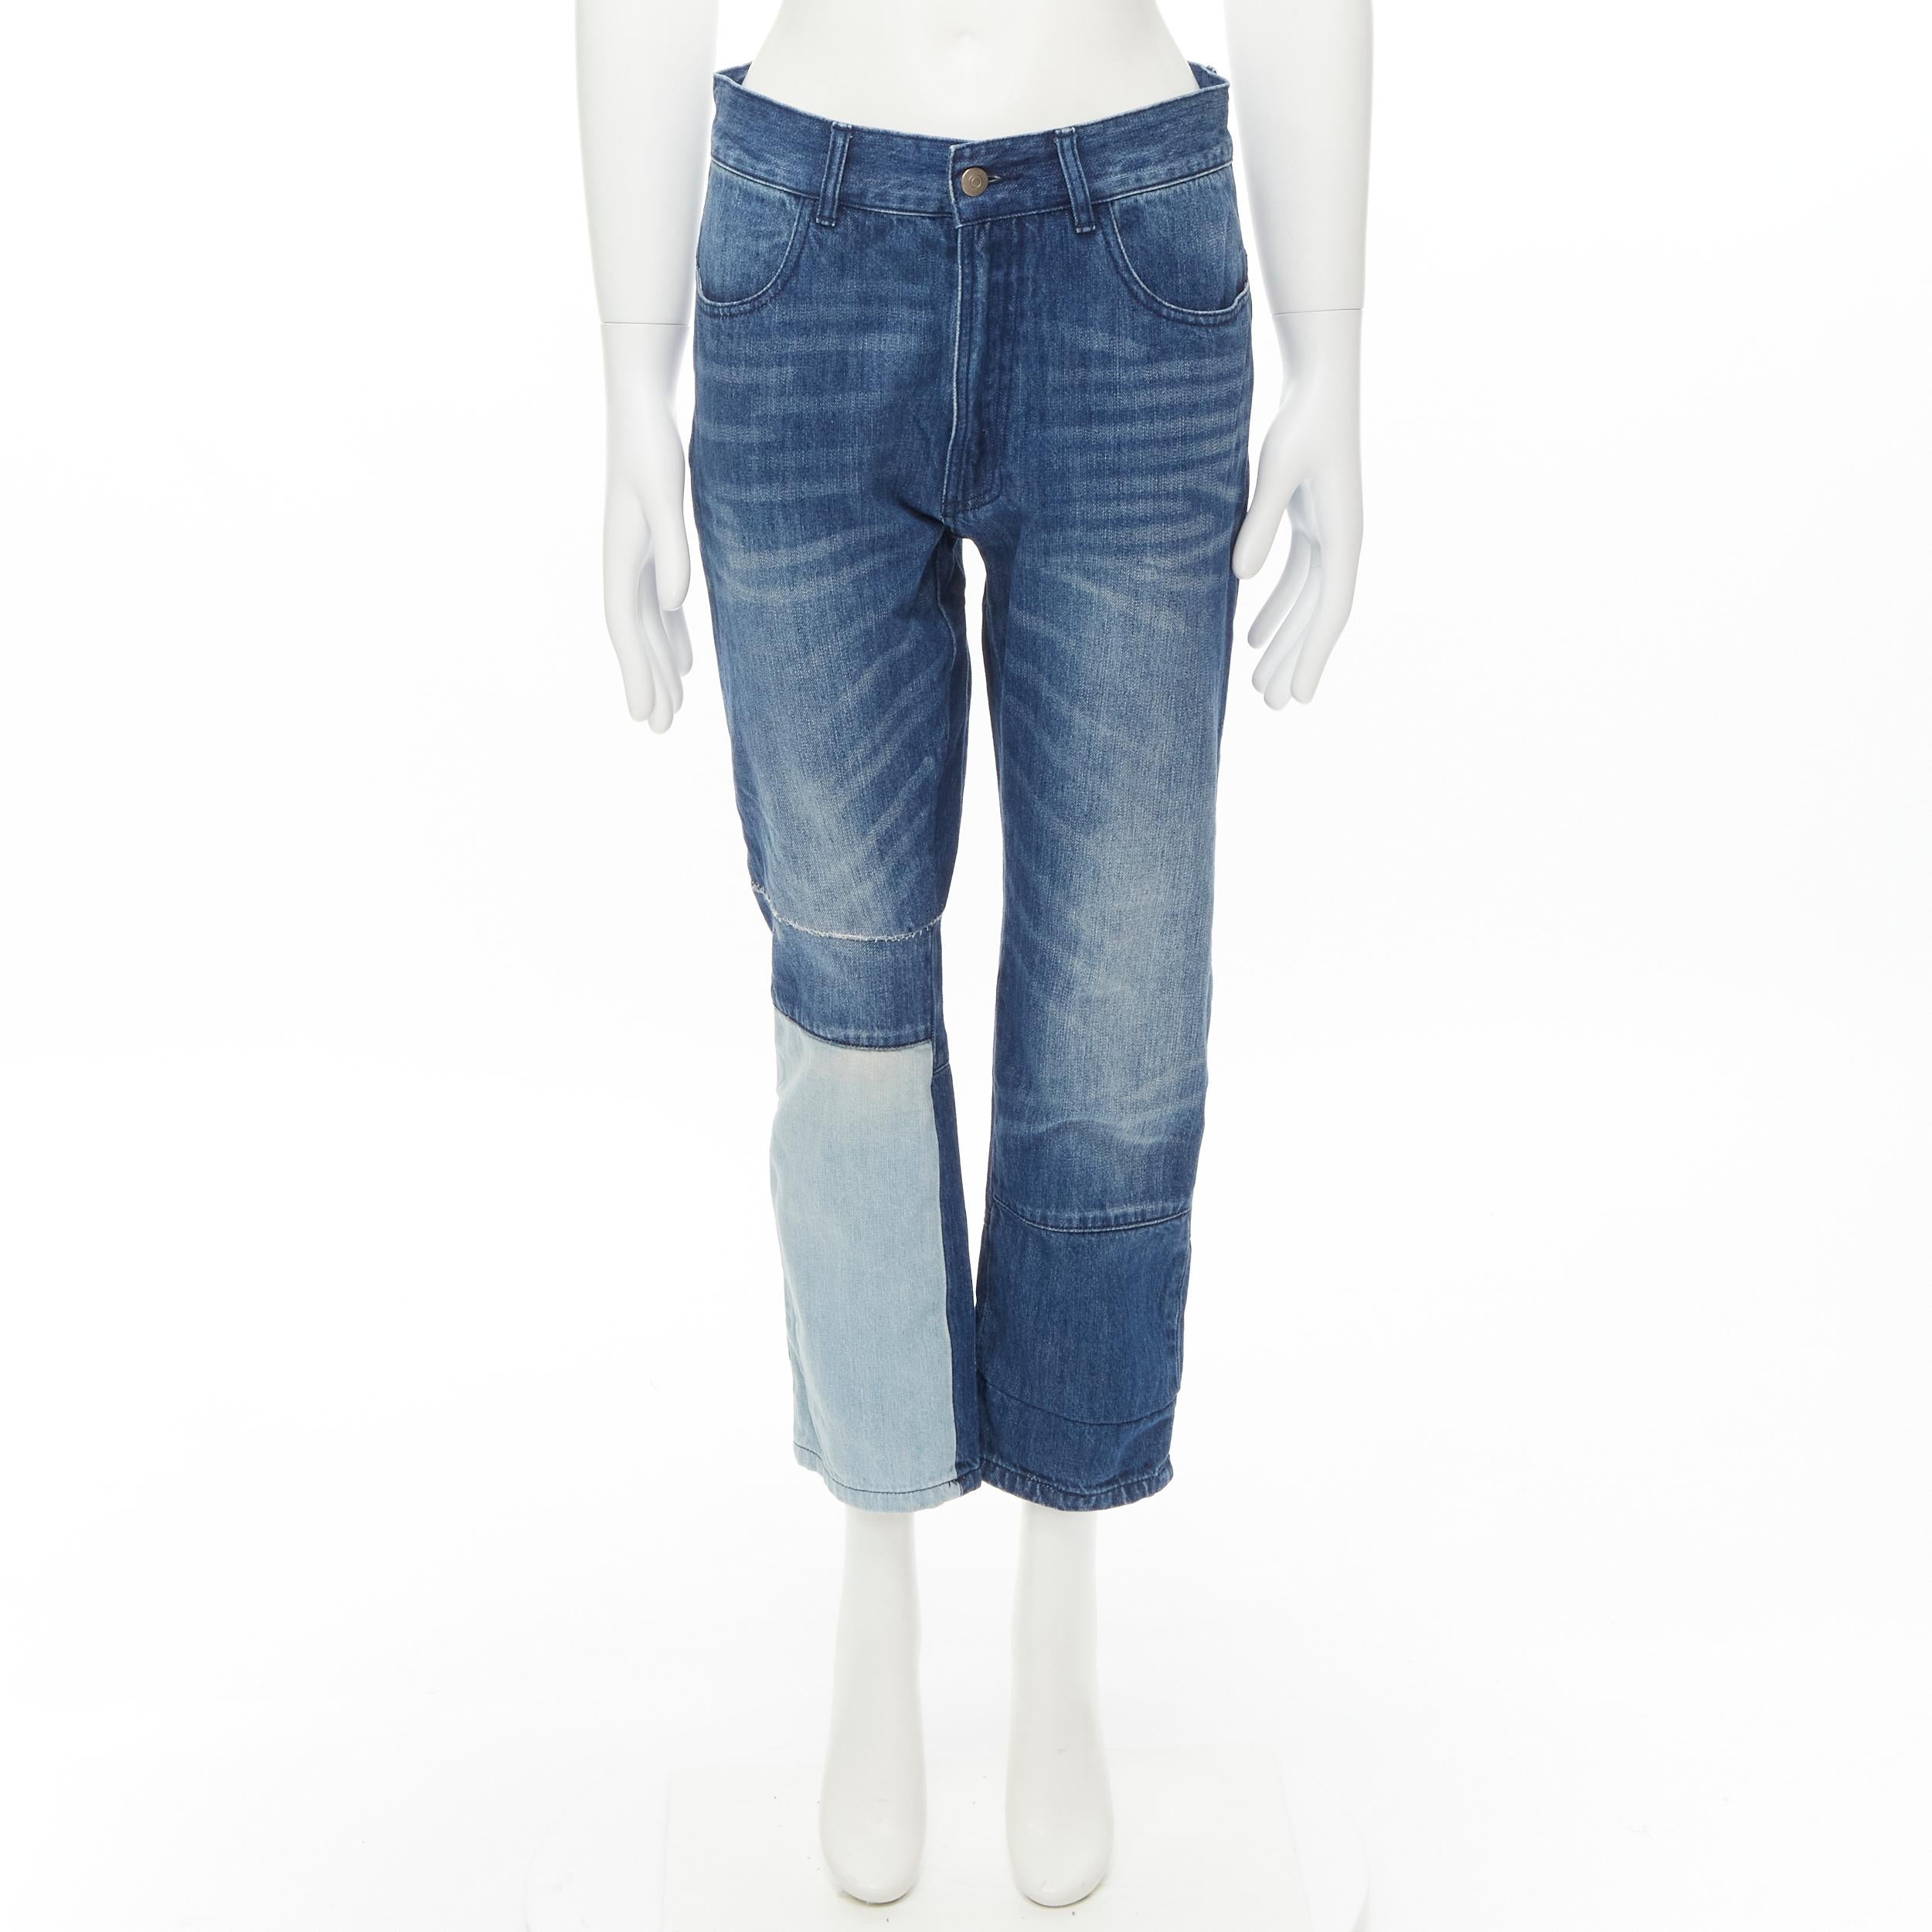 MAISON MARGEILA 2016 washed blue denim deconstructed patchwork cropped jeans 30